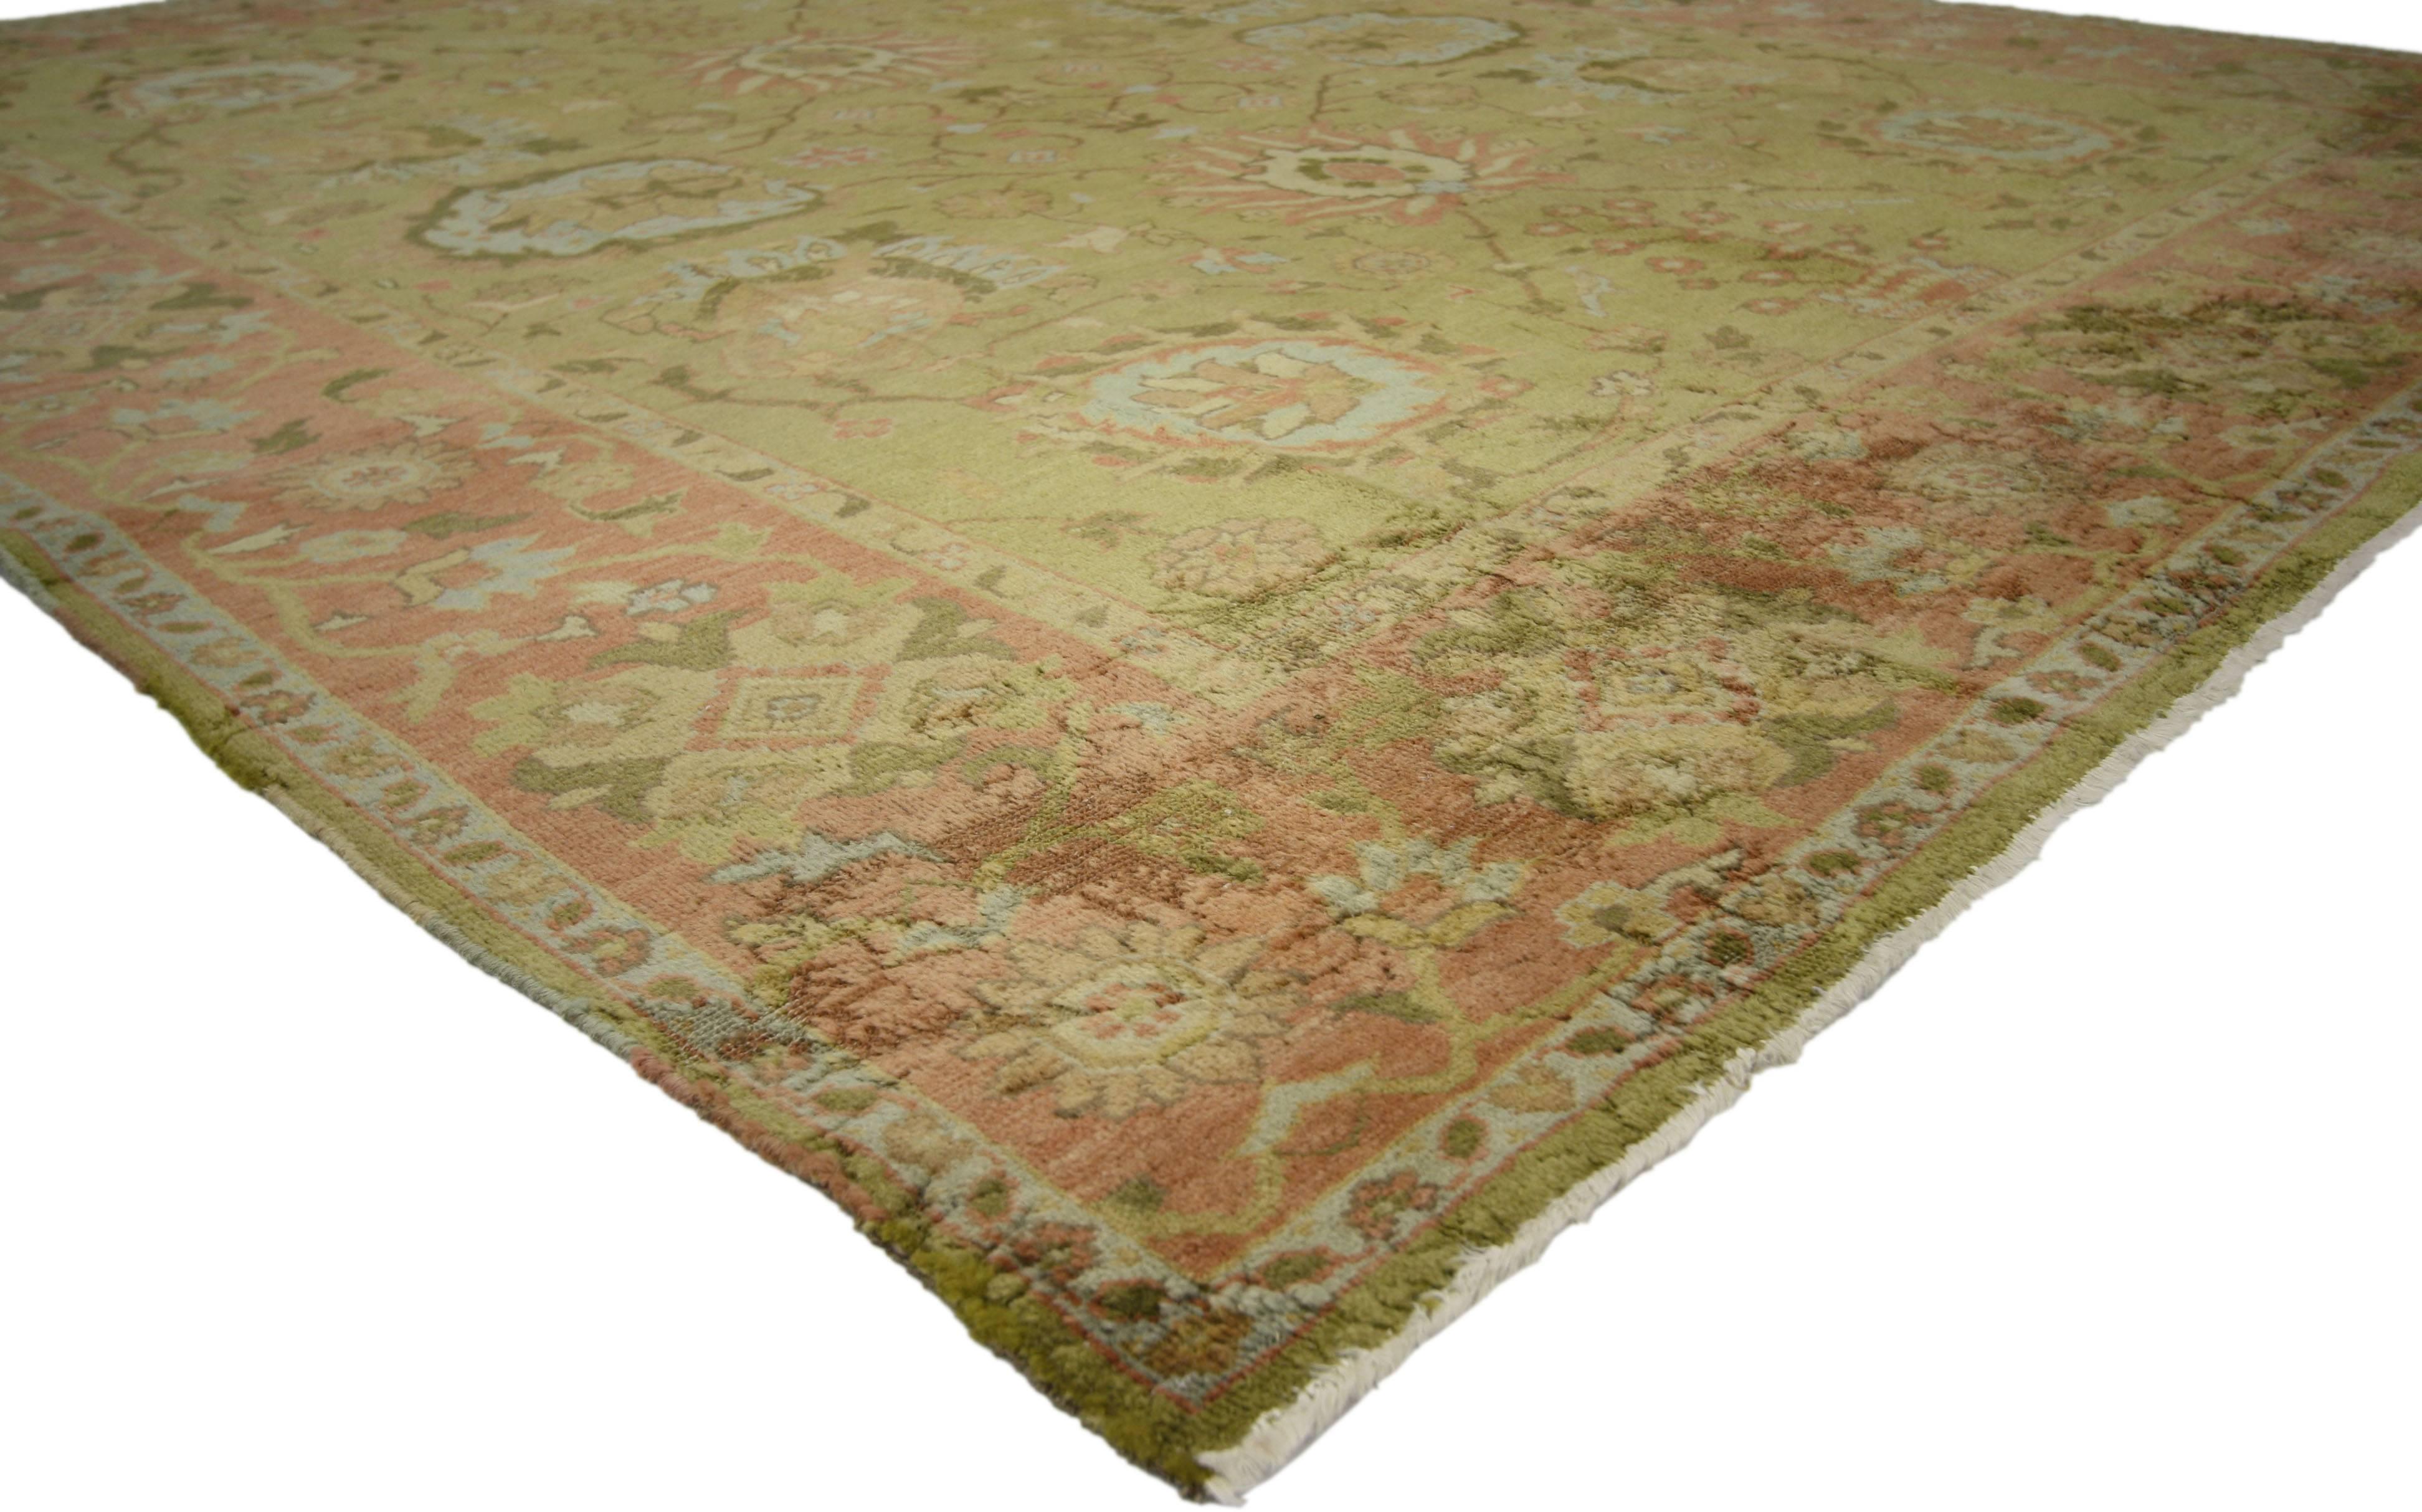 76688, a vintage Turkish Oushak area rug. This gorgeous hand-knotted wool Turkish Oushak rug features a classic vase design and blooming lotus in pistachio and cerulean; palmettes of salmon, cream and sage and corner palmettes in a similar color